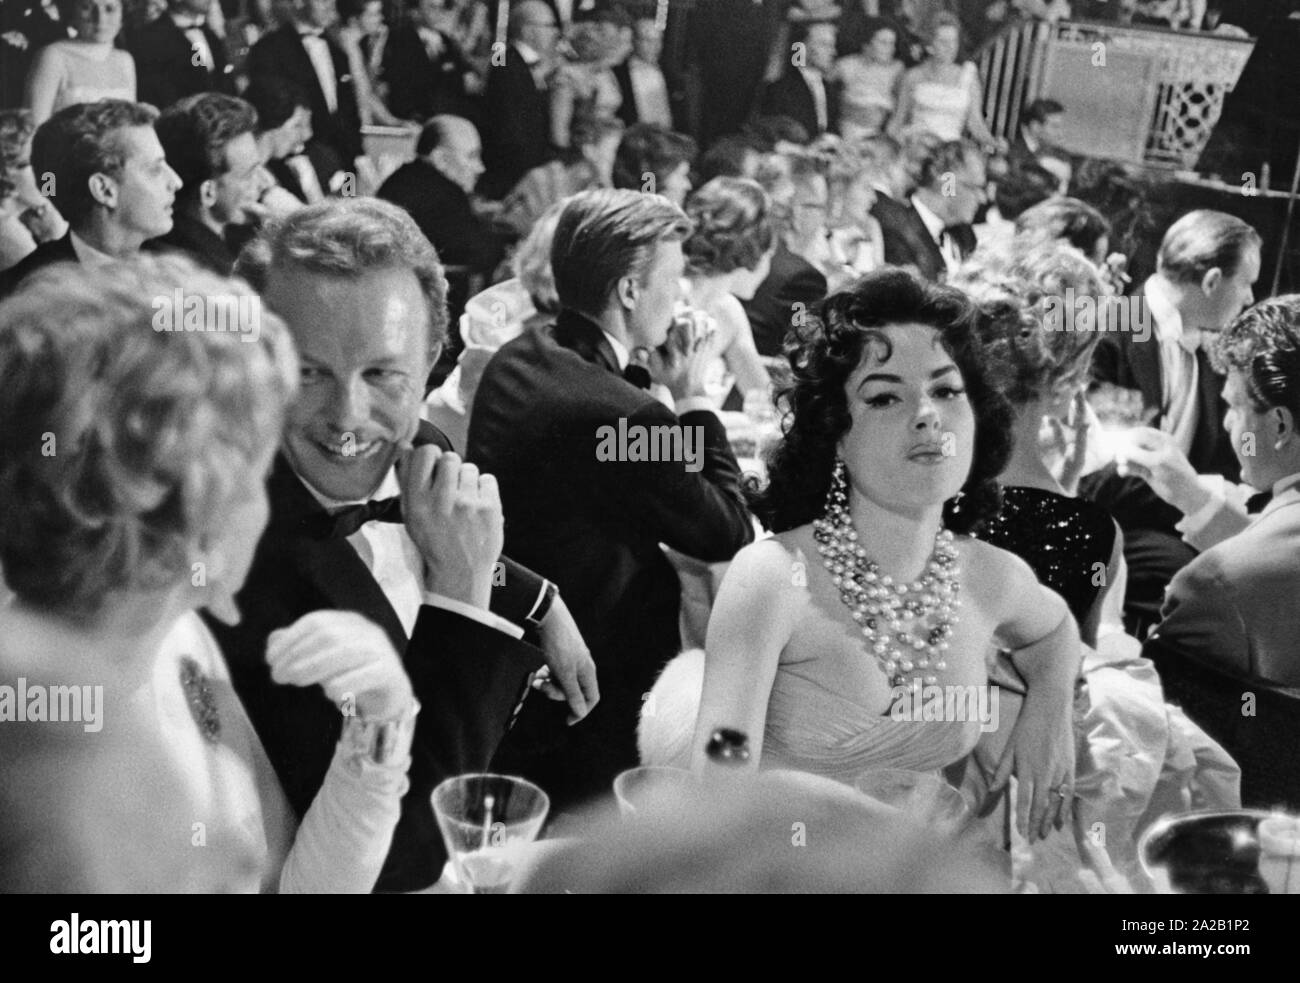 Rudolf Lenz and Mara Lane at the Bal Pare (grand ball) of the Muenchner Illustrierte in 1958. Stock Photo